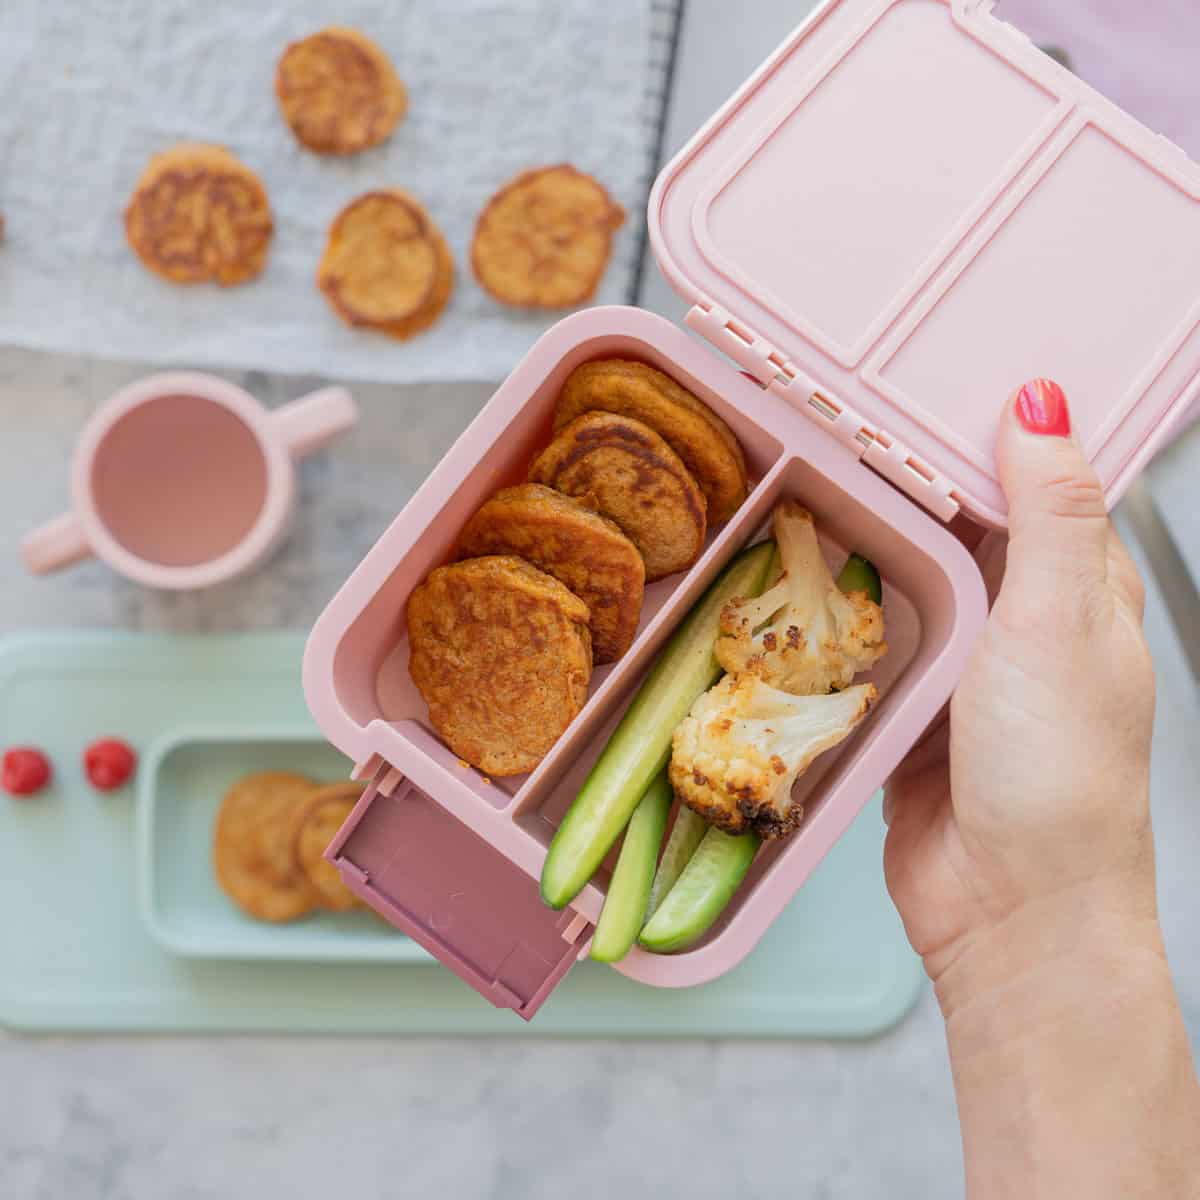 A small pink bento box packed with cauliflower florets, cucumber sticks and mini pancakes.